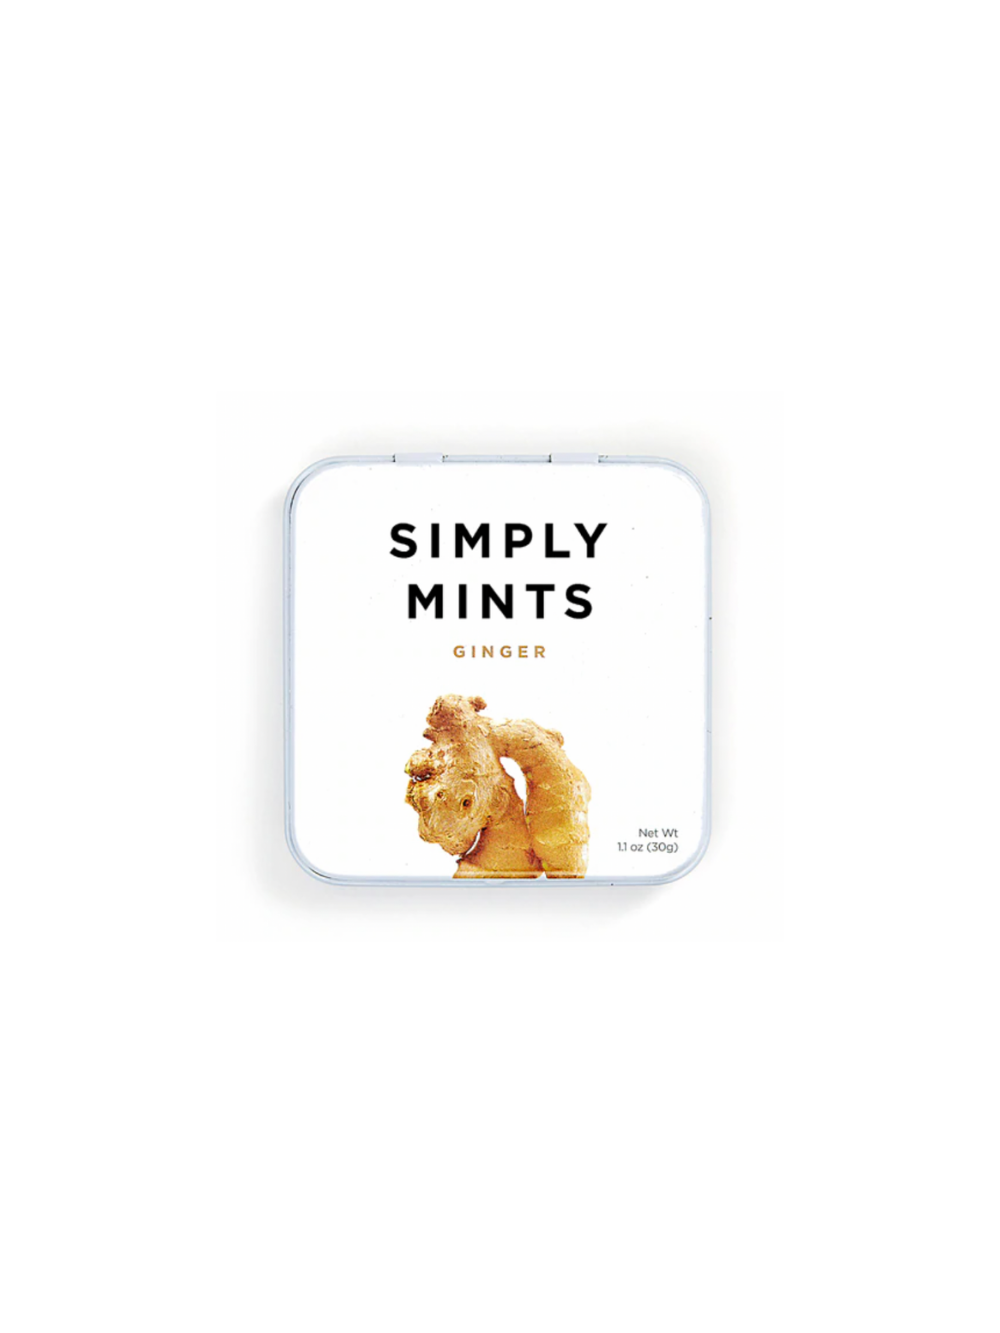 A white tin of ginger flavored mints. 